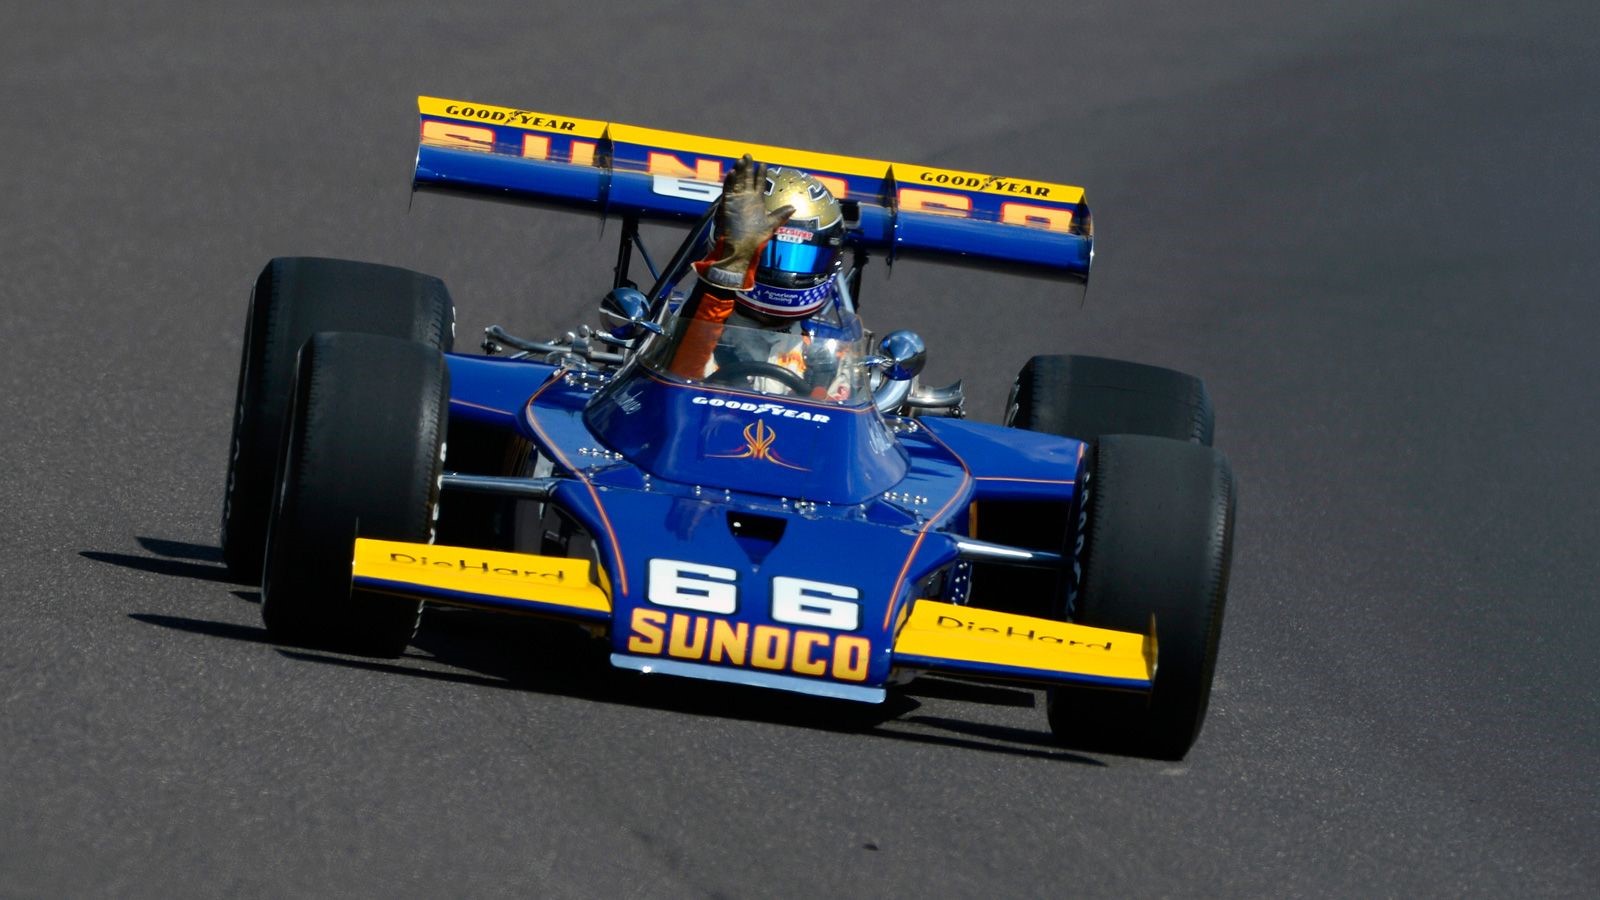 David Donohue drives his dad's 1972 Indy 500-winning car at the Indianapolis Motor Speedway in 2016. 